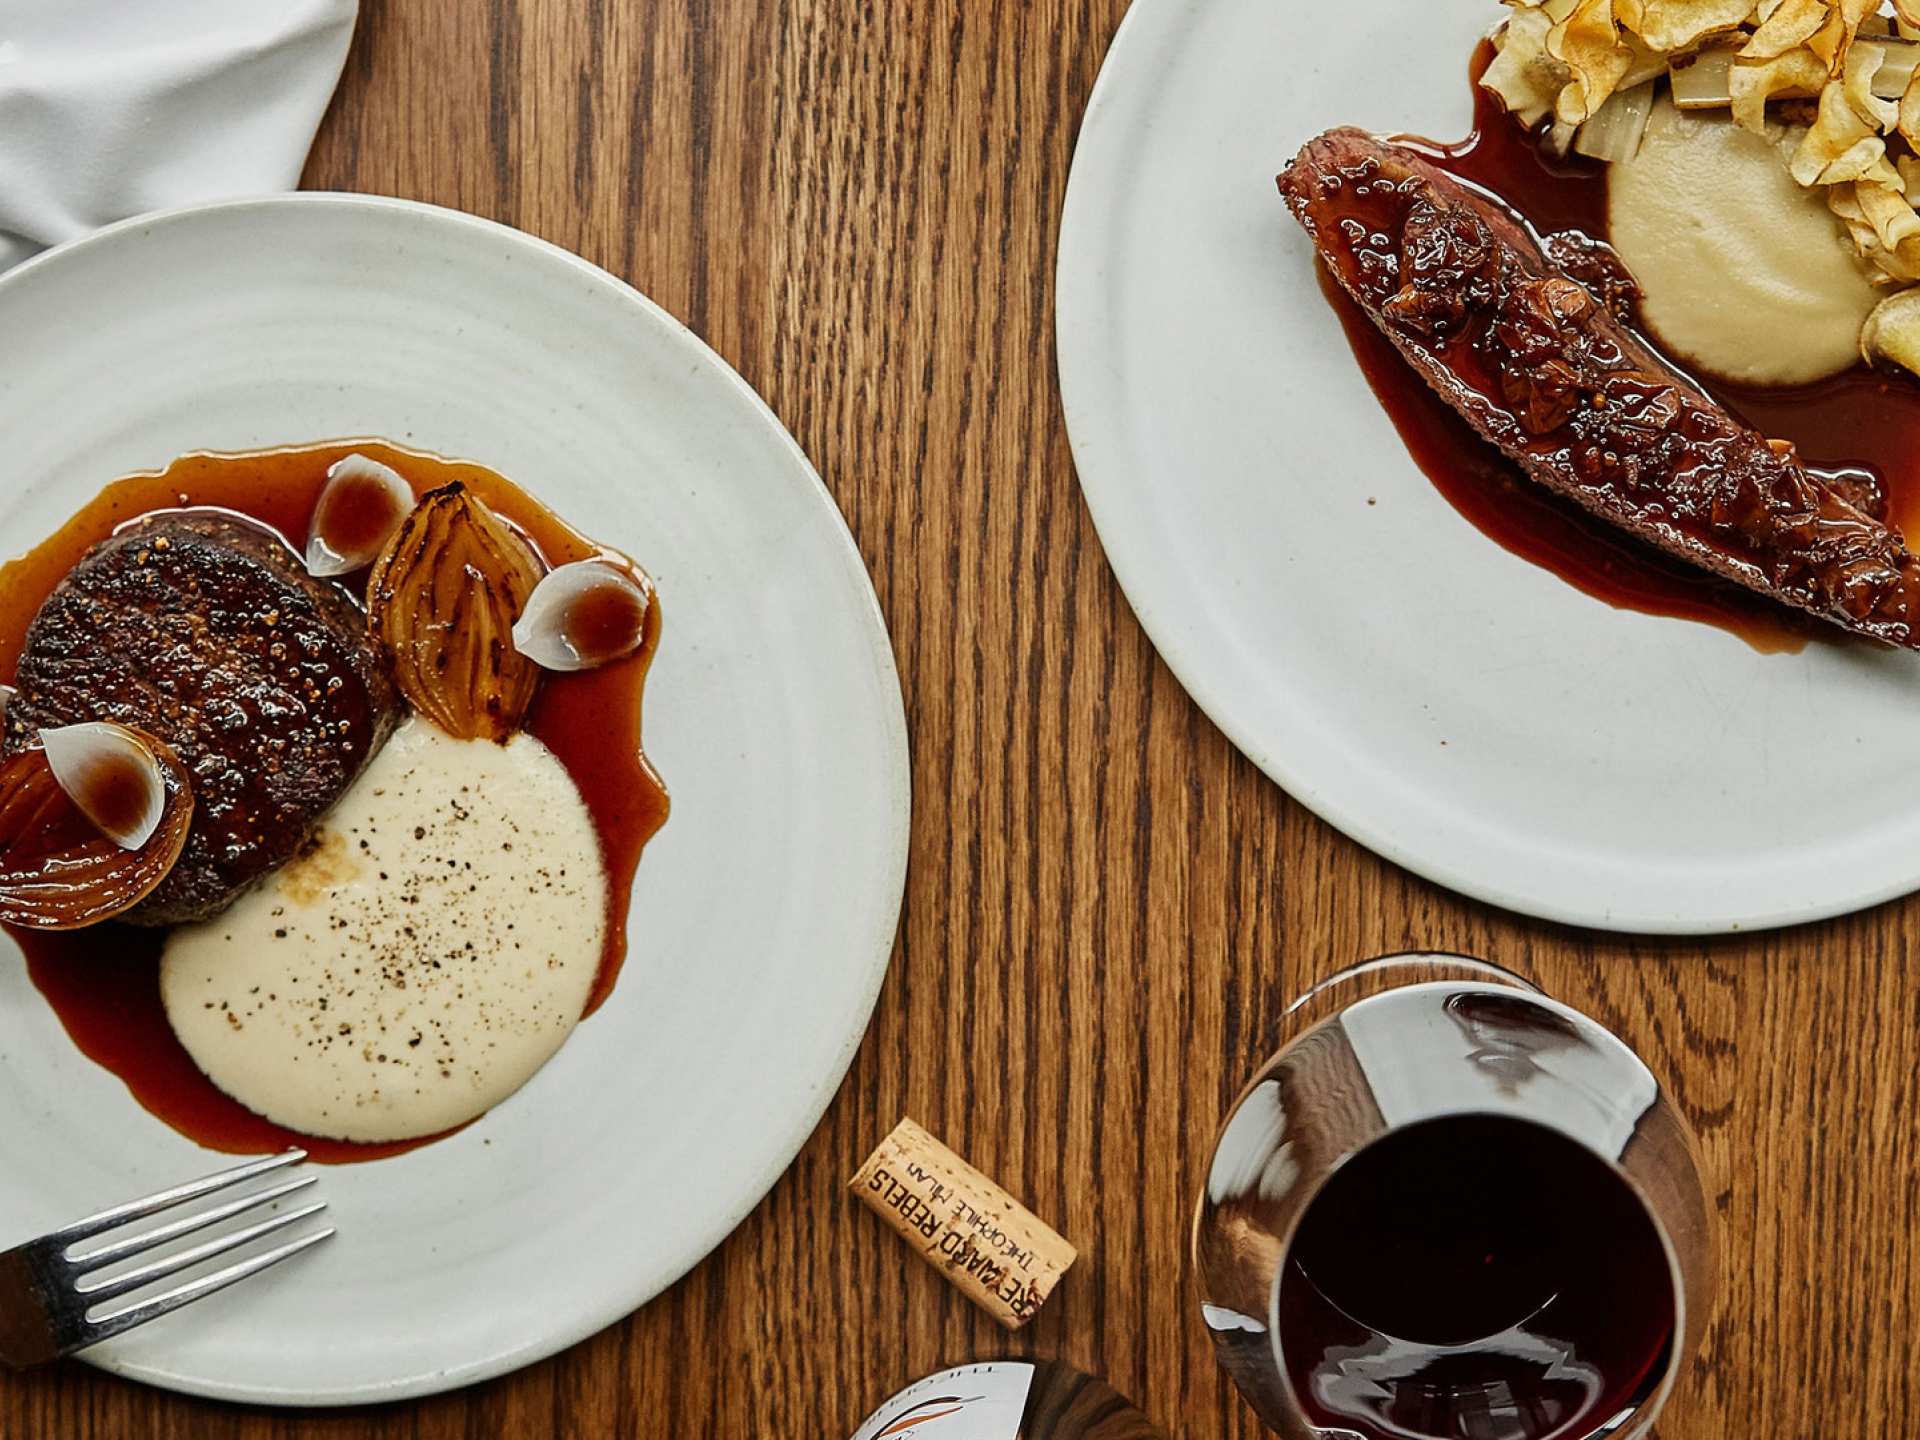 Toronto's most romantic restaurants | Steak and wine at Lapinou on King West